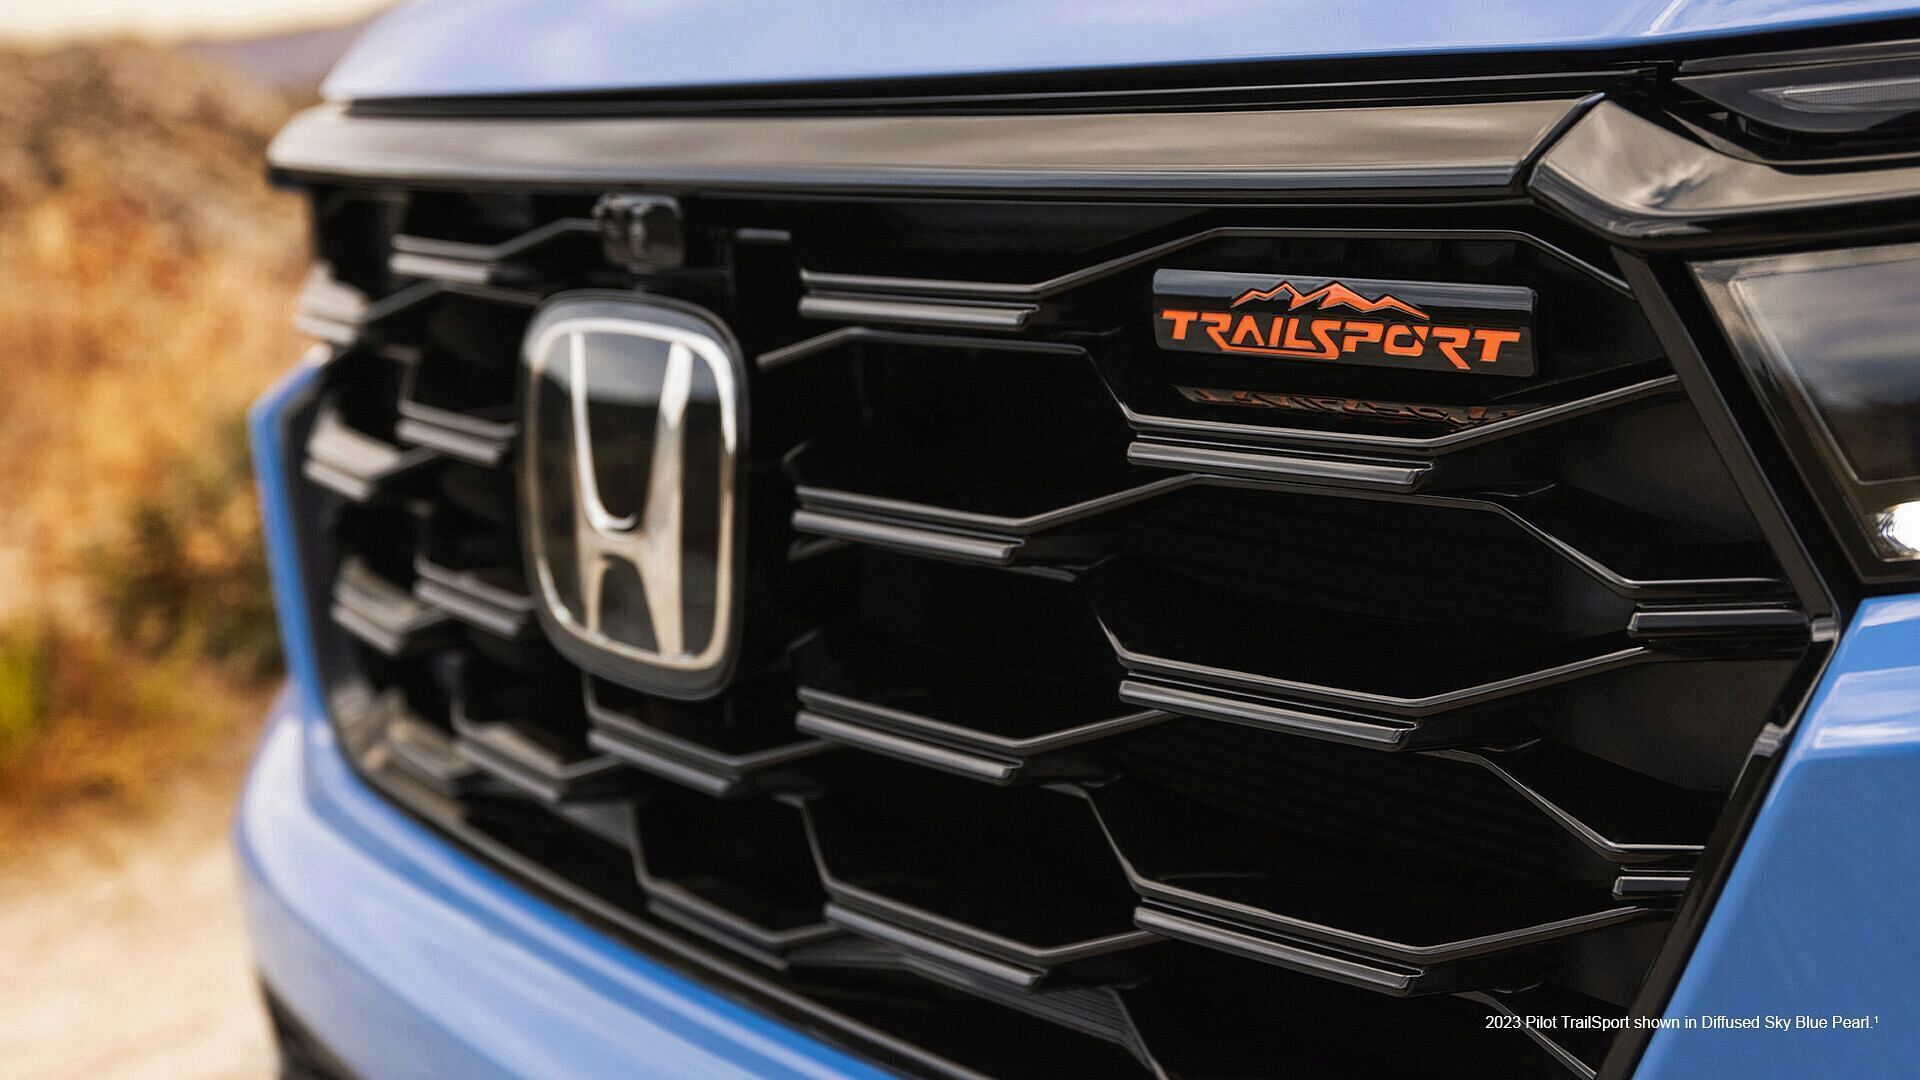 front grille of 2023 Honda Pilot TrailSport shown in Diffused Sky Blue Pearl